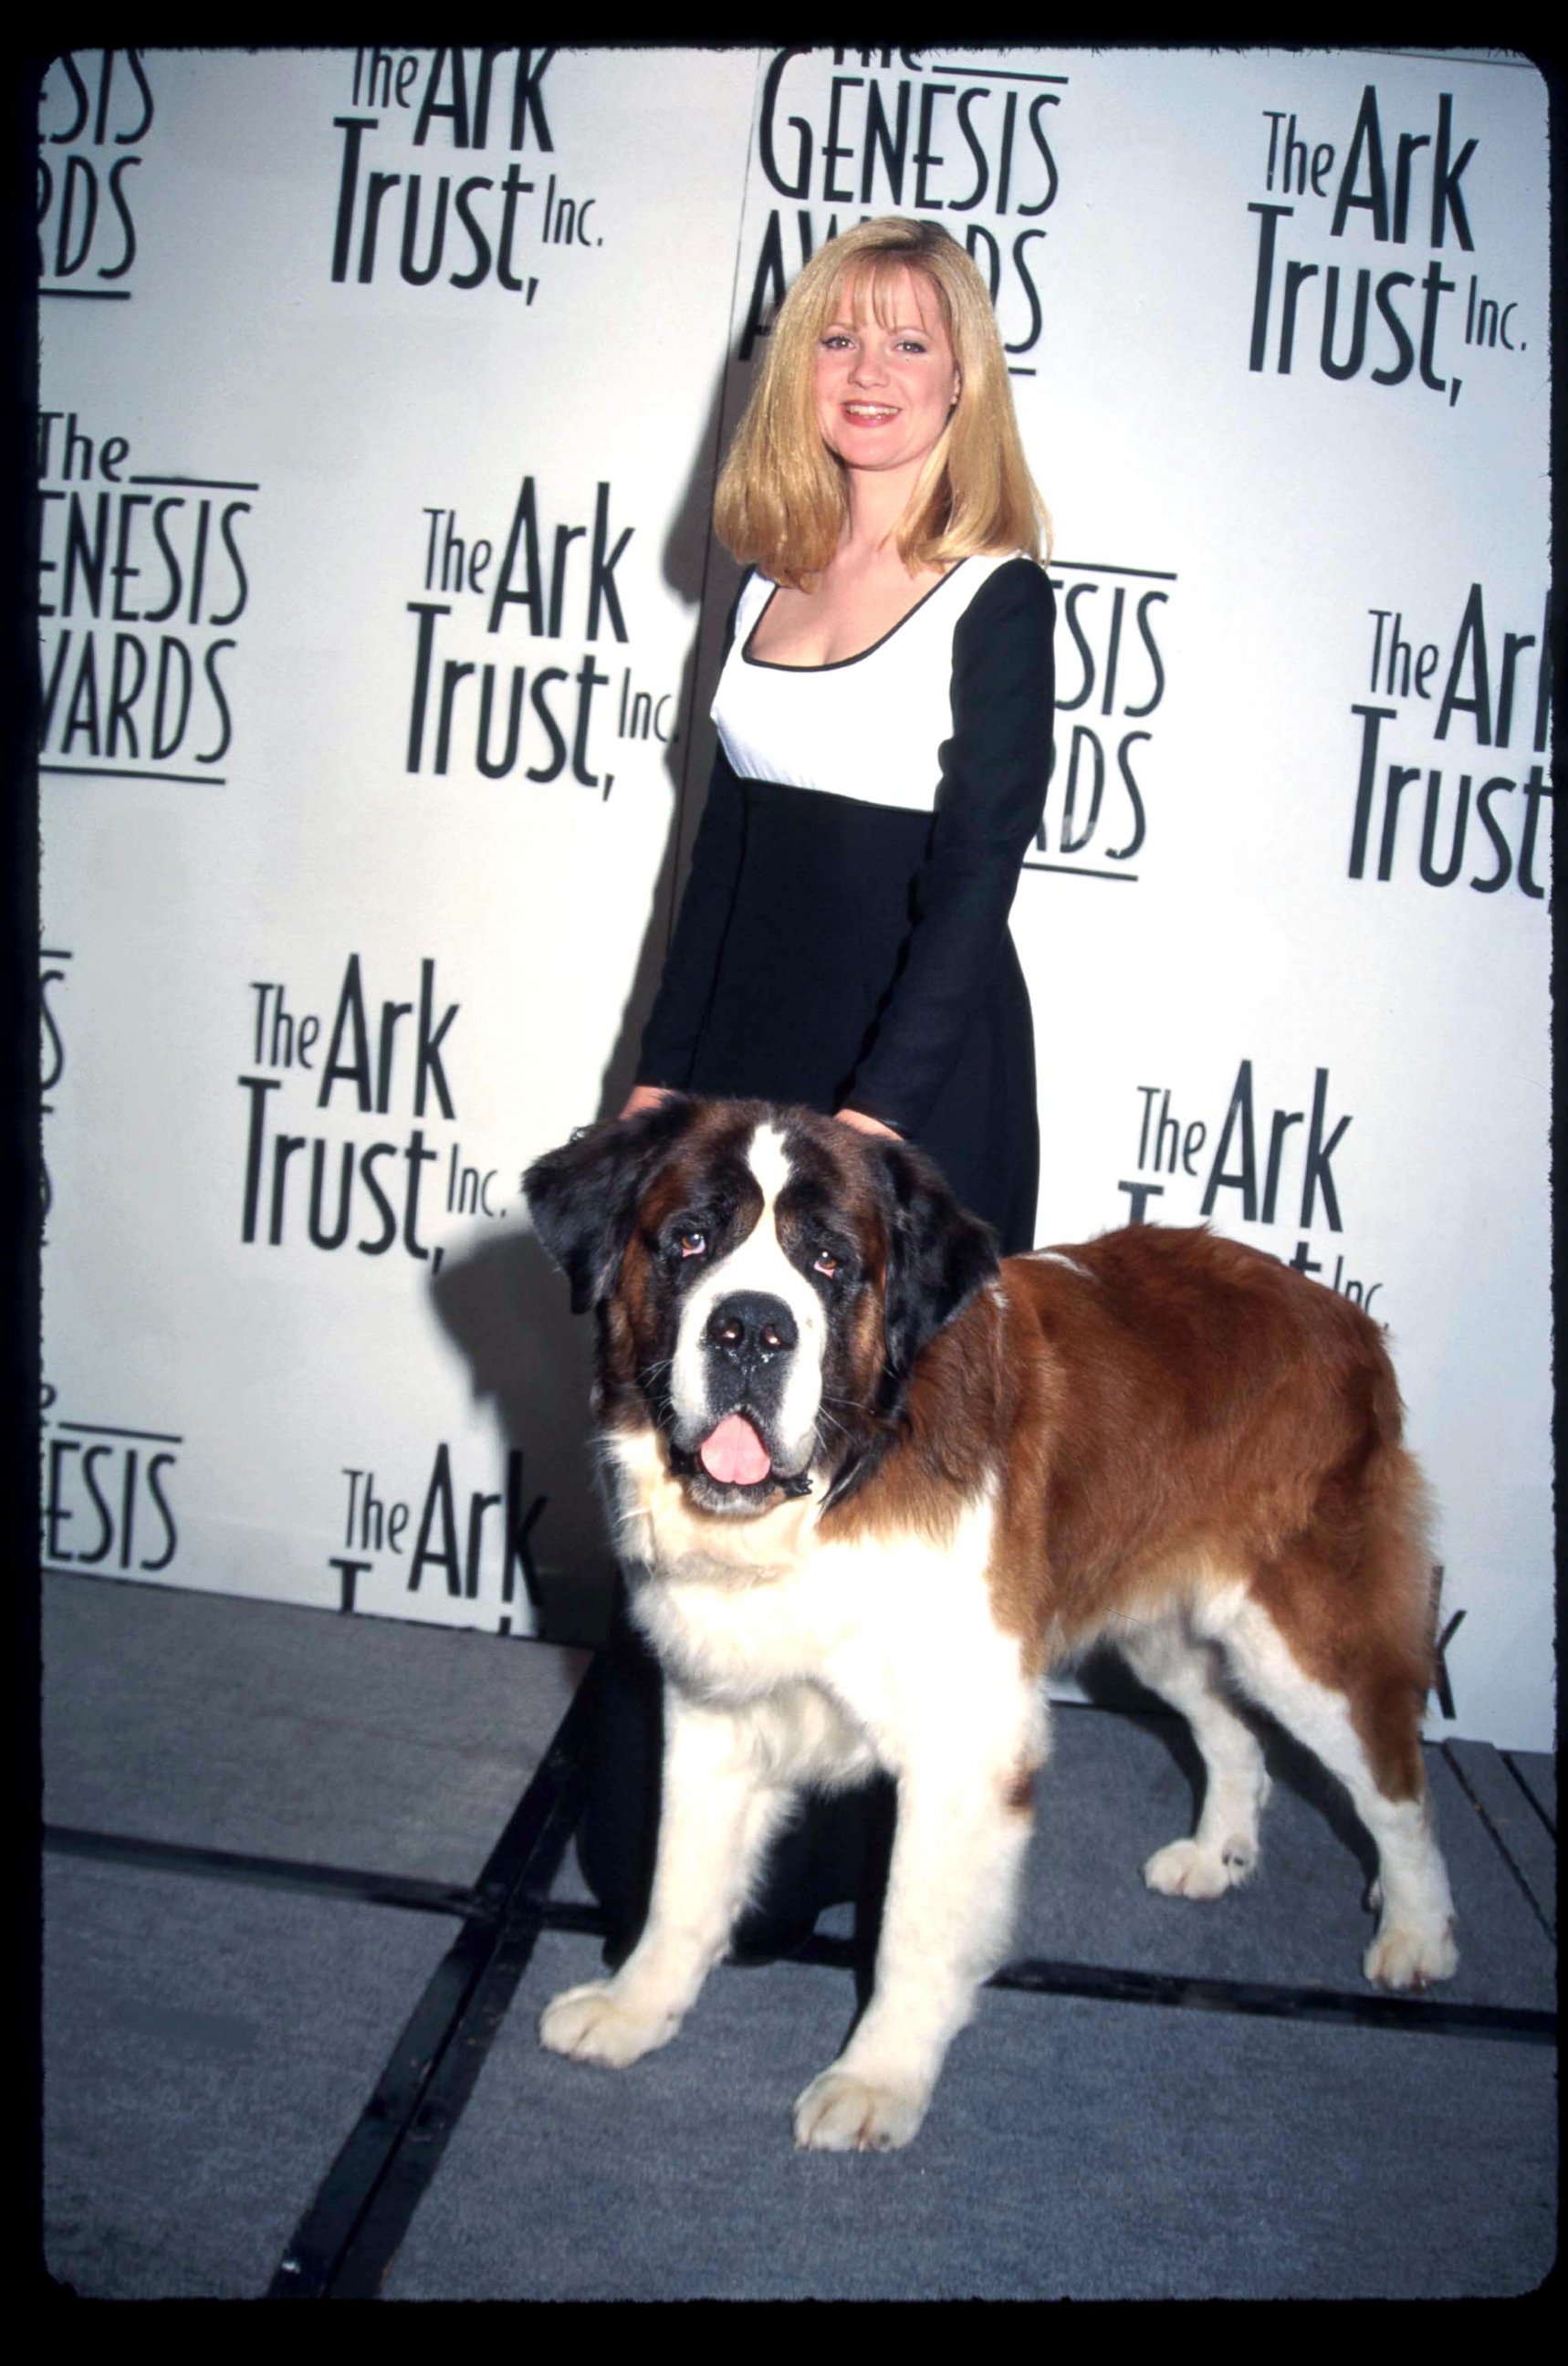 PHOTO: 'Beethoven' the dog appears here with Bonnie Hunt at the Genesis Awards April 5, 1997 in Los Angeles, Calif.